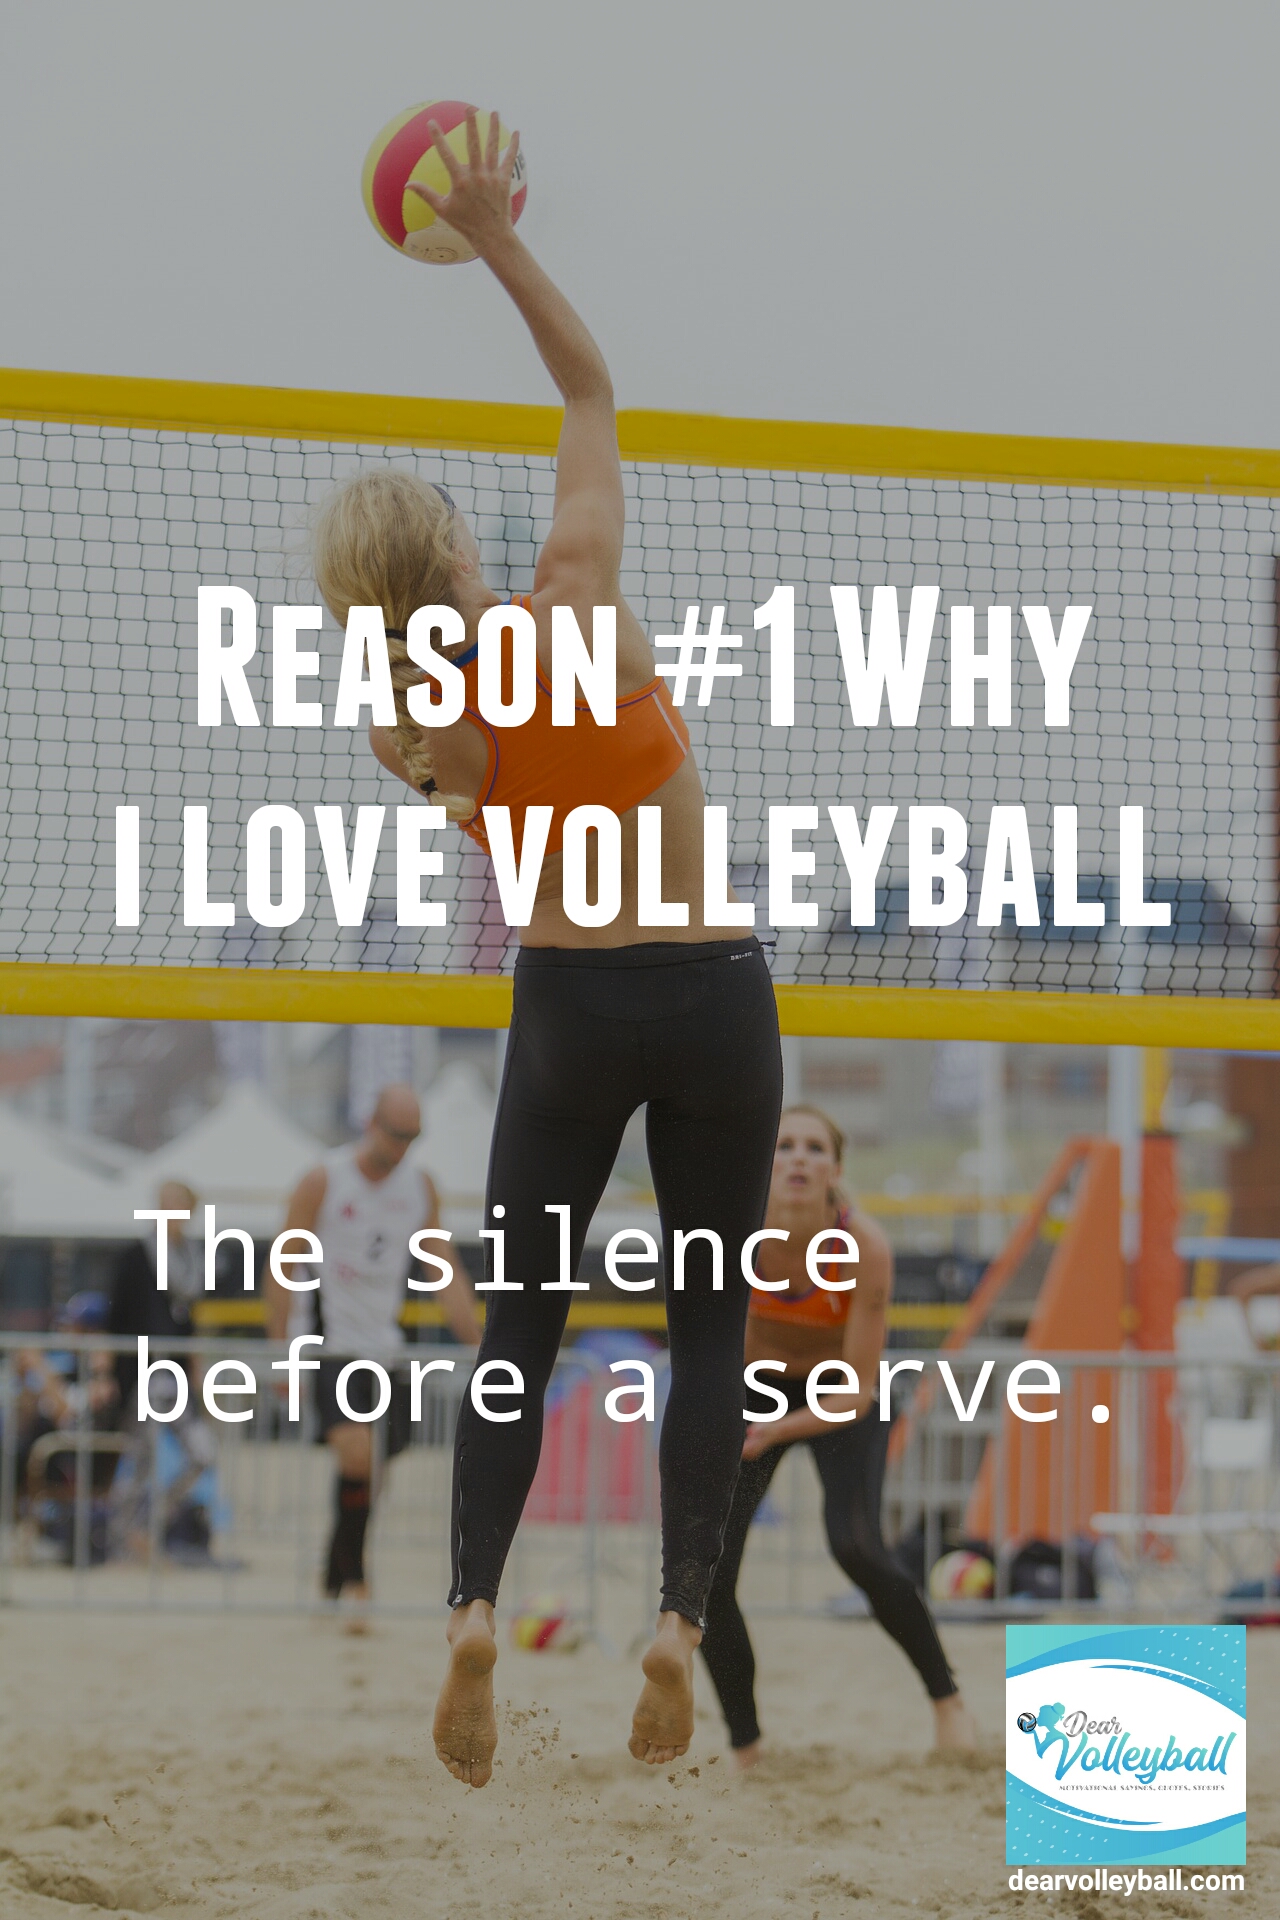 "Reason #1 why I love volleyball..the silence before a serve." and other strong girls pictures paired with an inspirational volleyball quote on Dear Volleyball.com.